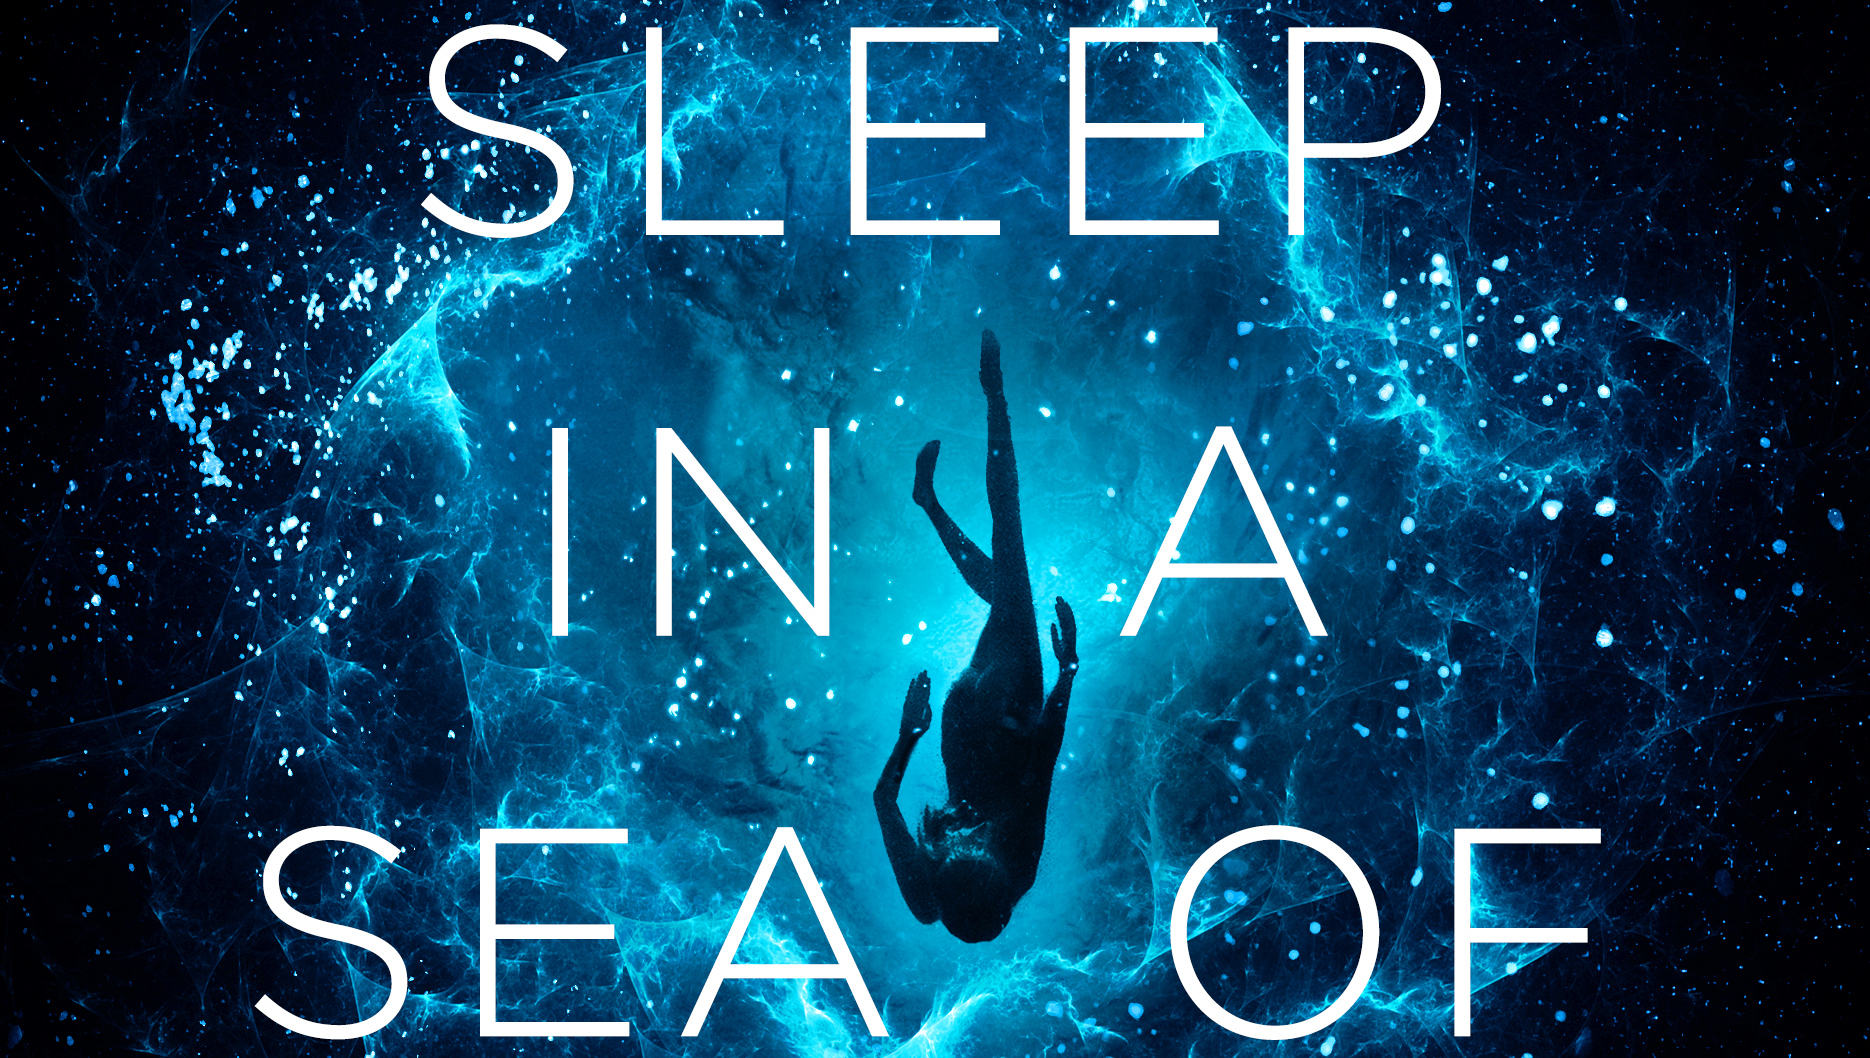 Kira: Explore the characters from To Sleep in a Sea of Stars